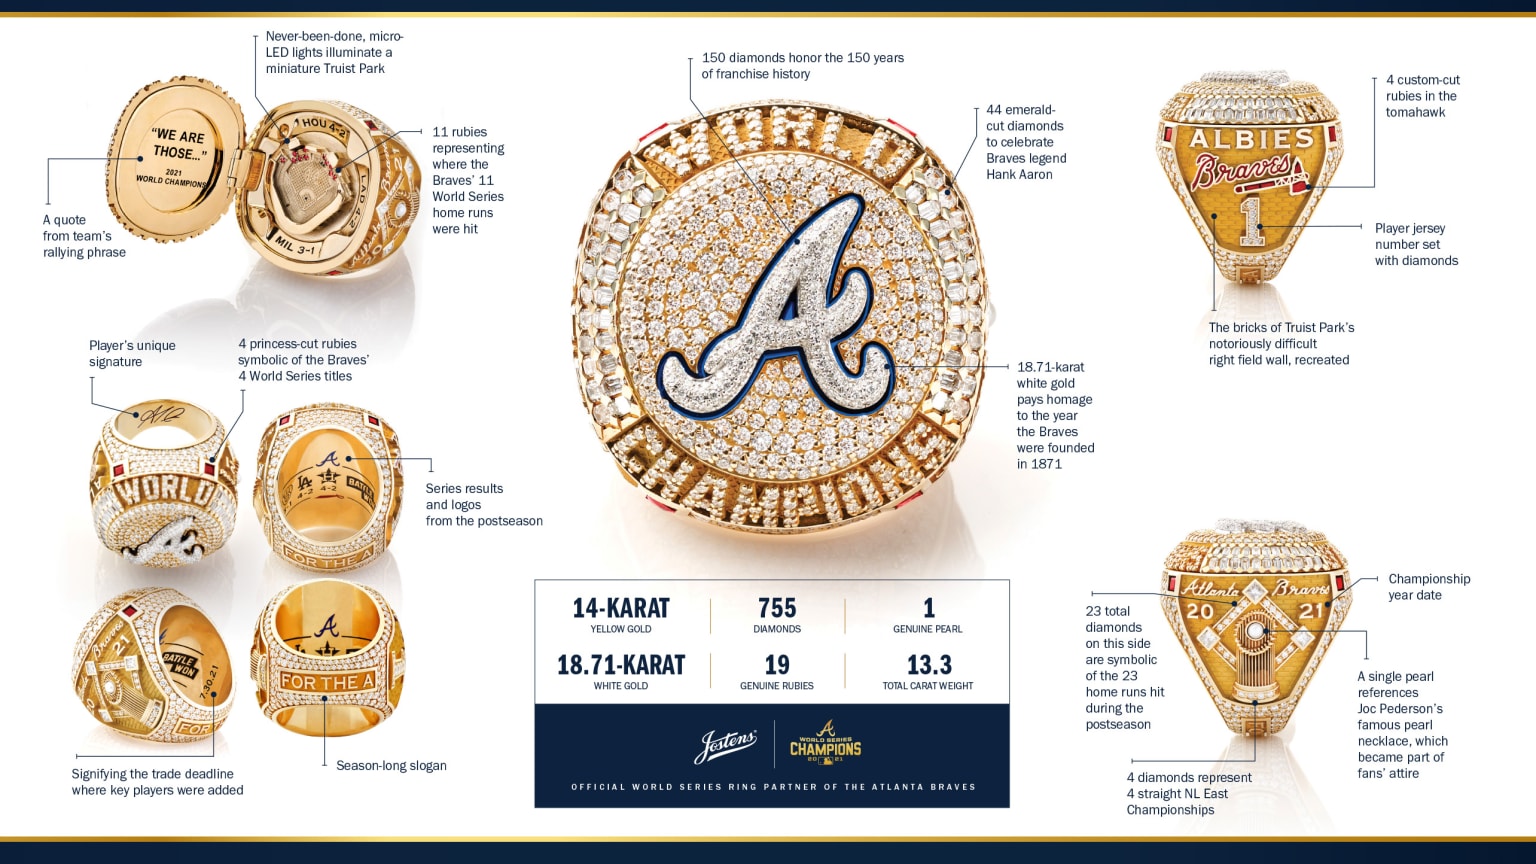 Enter for a chance to win the Braves 2021 World Series Ring